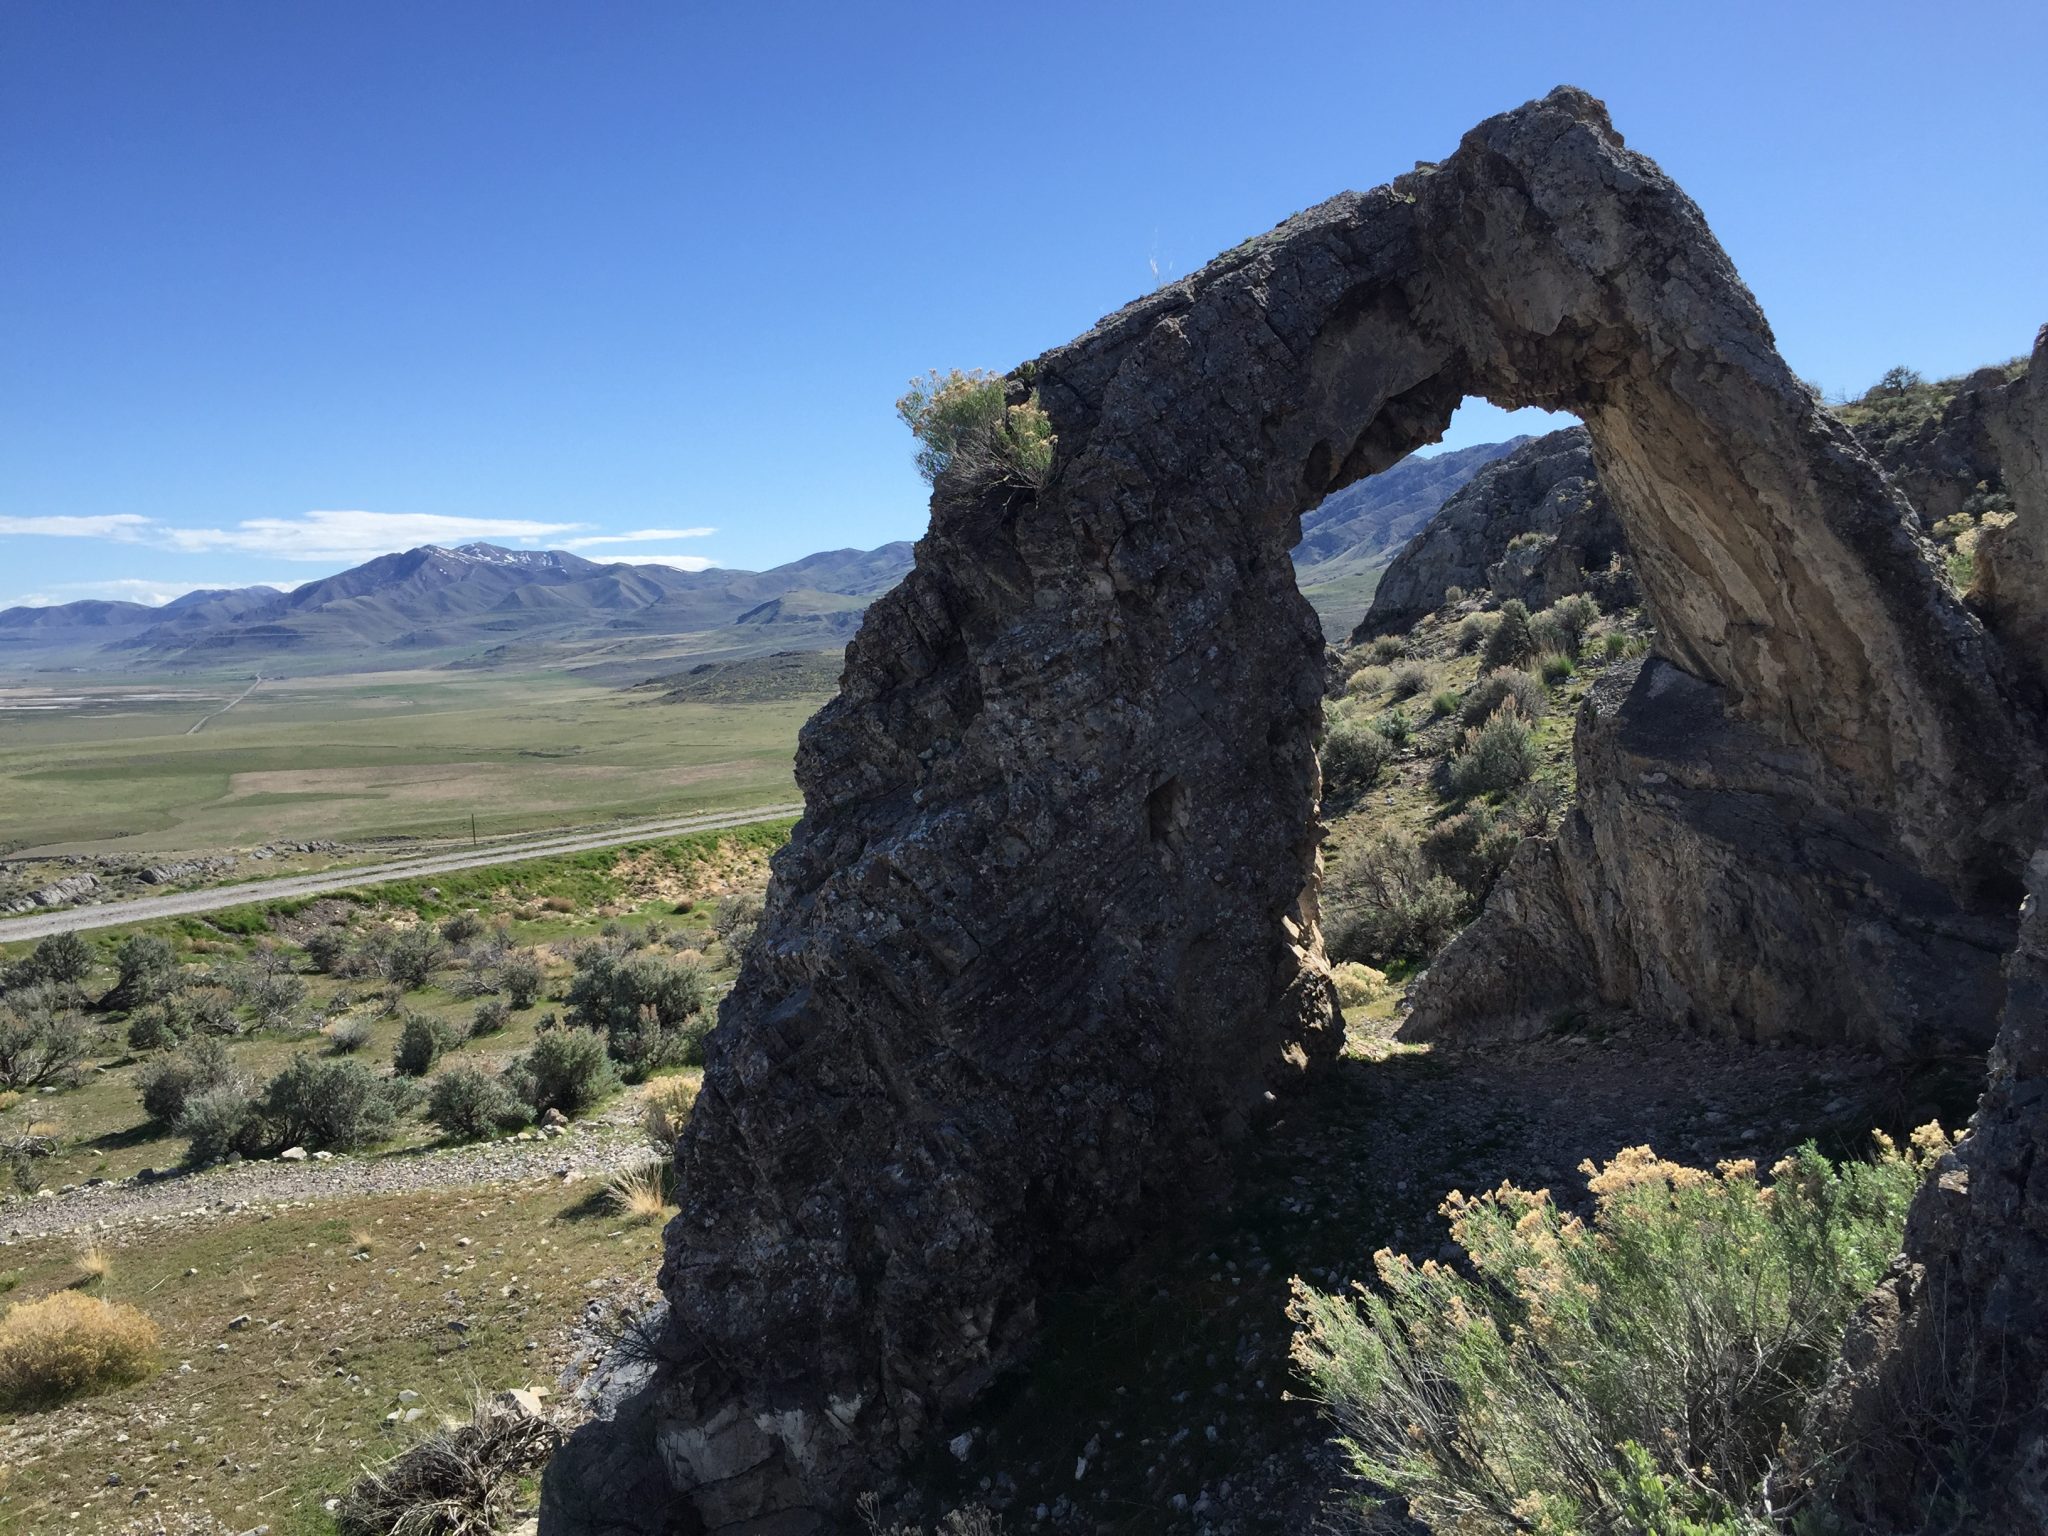 Chinese Arch – Promontory Utah